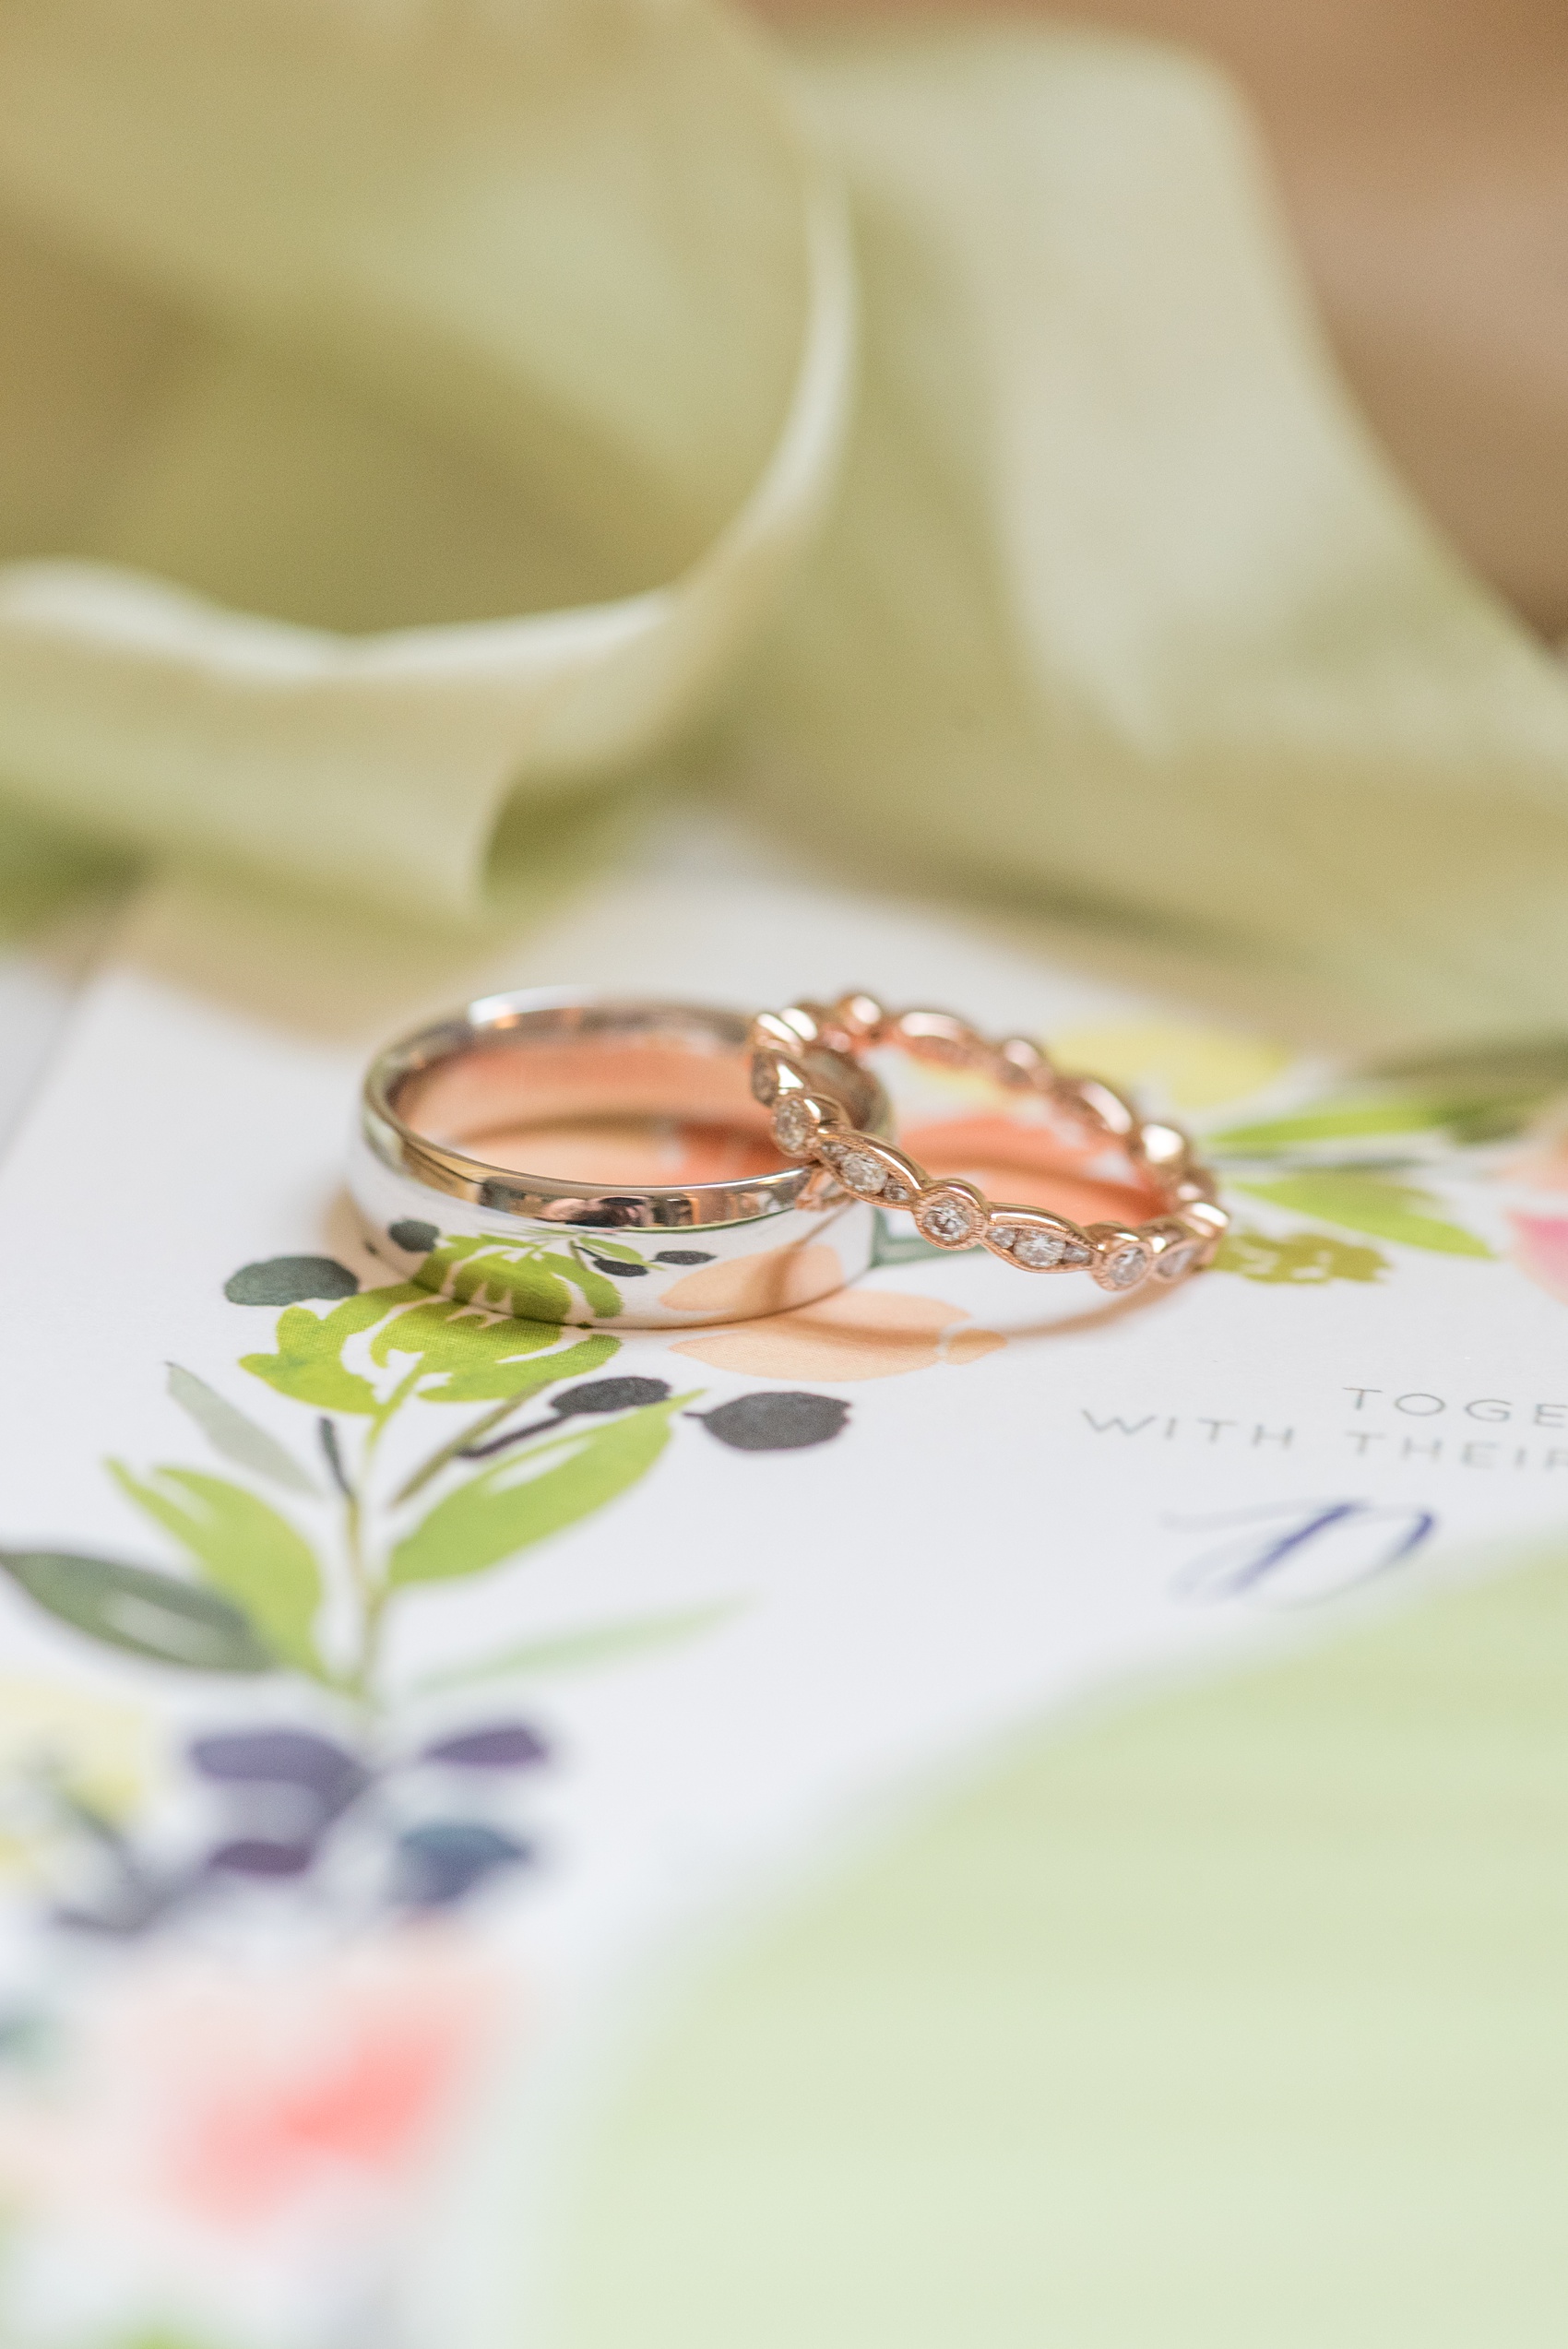 Wedding photos at Crabtree's Kittle House in Chappaqua, New York by Mikkel Paige Photography. The bride and groom's rings were photographed in this venue in Westchester county for a summer wedding. Their rings were white and rose gold and had diamond detail on the side. Click through to see what was engraved in the groom's ring! #groomdetails #mikkelpaige #CrabtreesKittleHouse #WestchesterWeddingVenues #WestchesterWedding #summerwedding #weddingdetails #rosegold #weddingrings #engagementringsidedetail